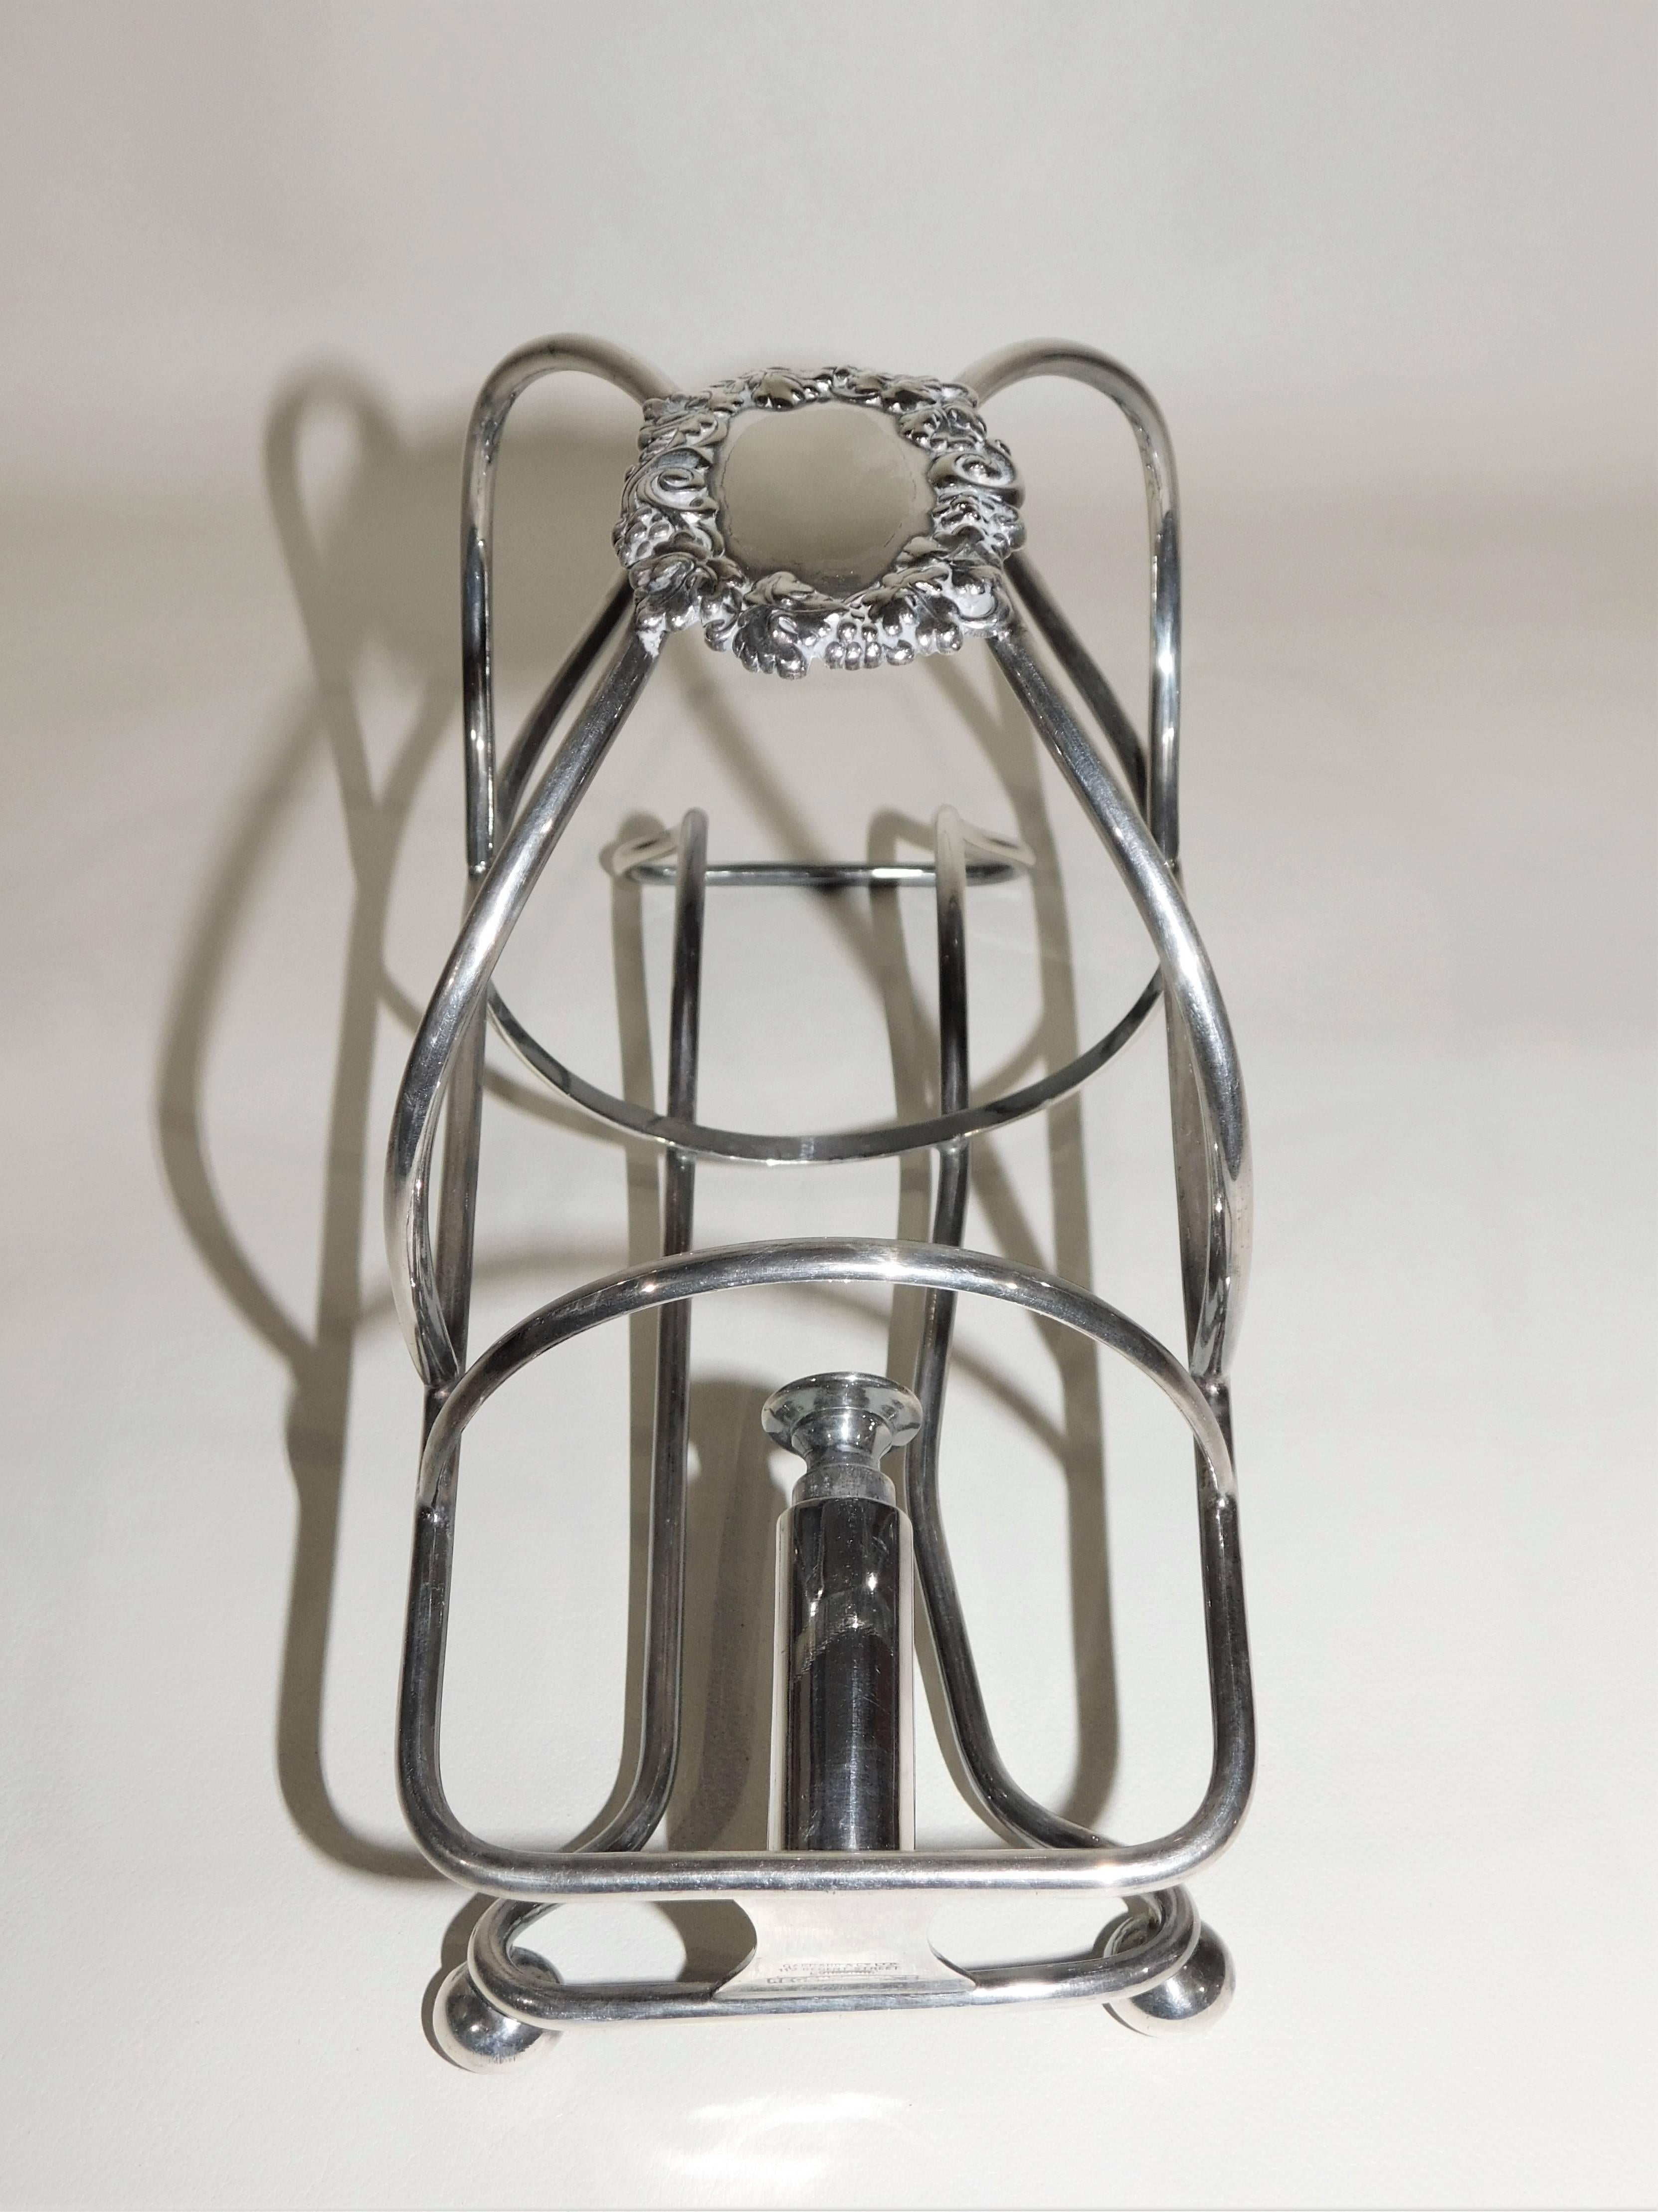 English Silver Plated Garrard & Company Wine Bottle Cradle Pourer In Excellent Condition For Sale In Hamilton, Ontario